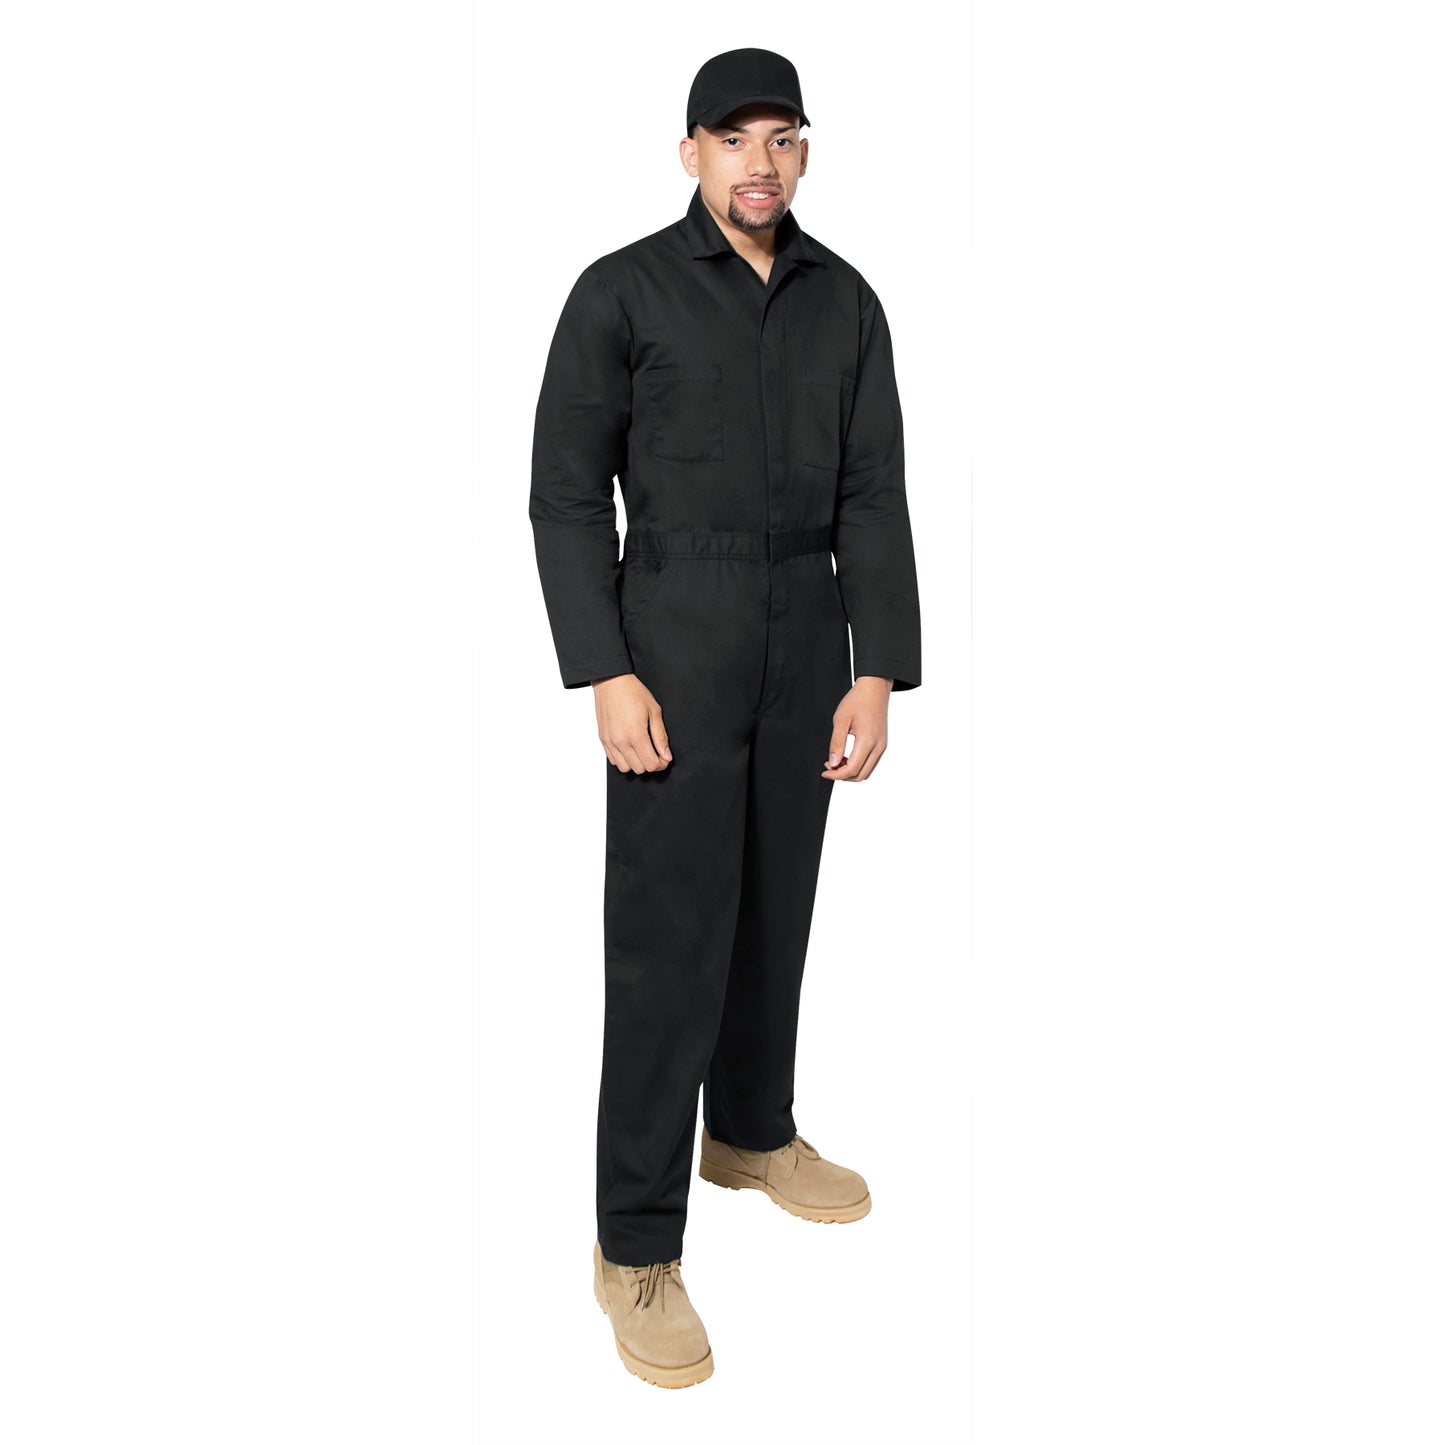 Milspec Workwear Coverall New Arrivals MilTac Tactical Military Outdoor Gear Australia